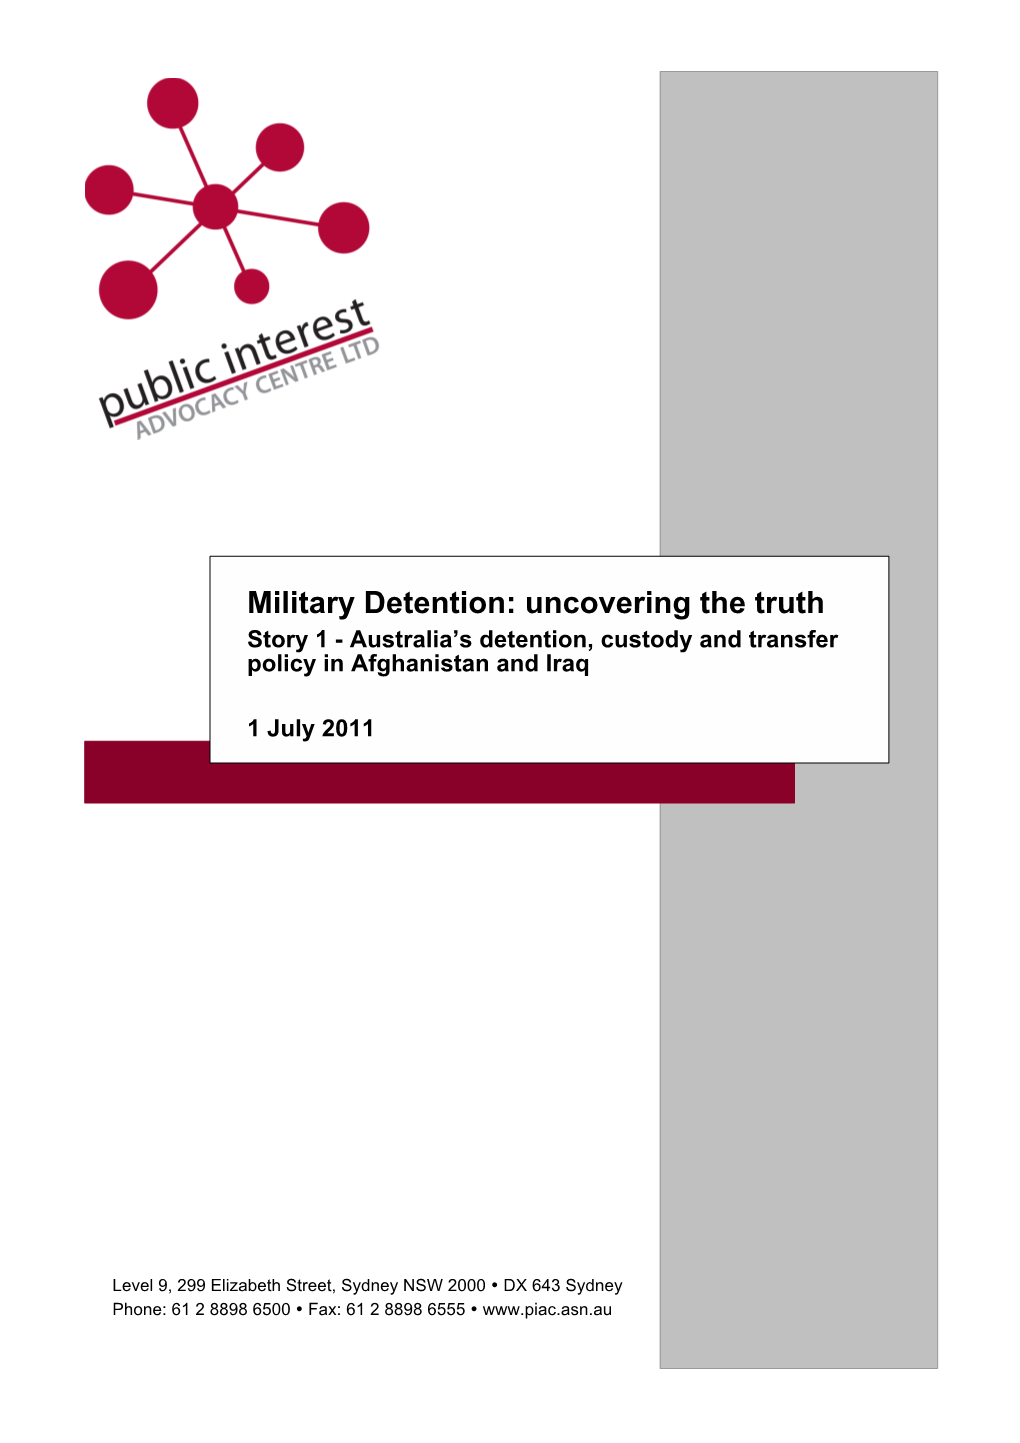 Military Detention: Uncovering the Truth Story 1 - Australia’S Detention, Custody and Transfer Policy in Afghanistan and Iraq